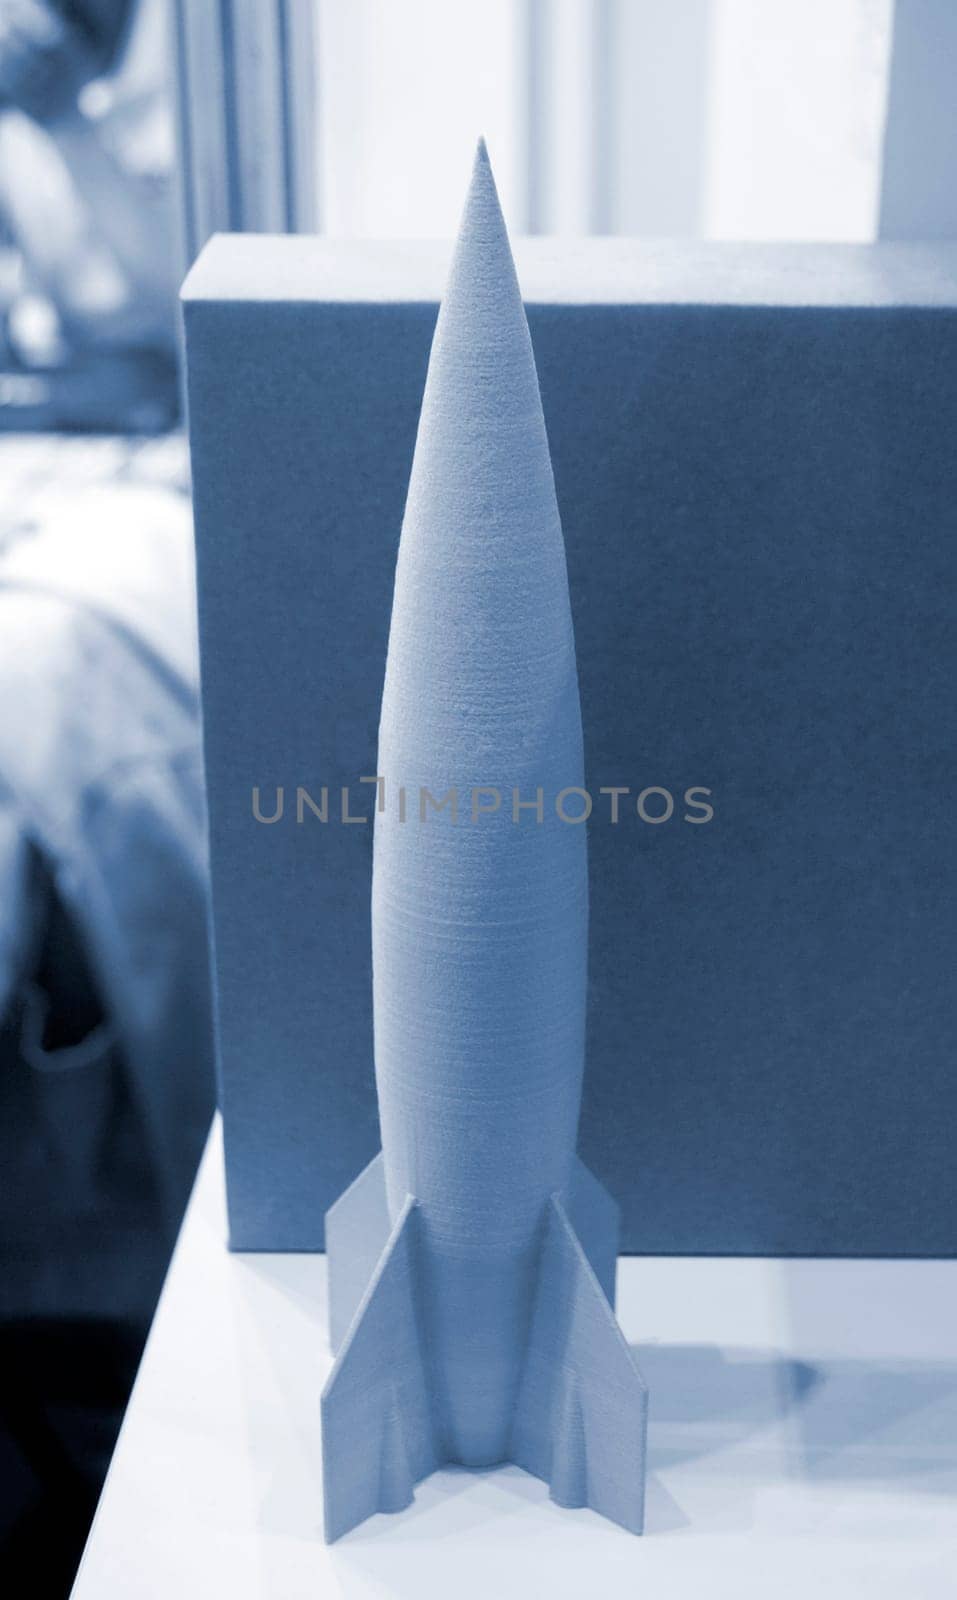 Art object model rocket printed on 3D printer. Rocket toy created by 3D printing from molten plastic. Example creating prototype by 3D printer. Concept 3D printing. Printing innovation technology